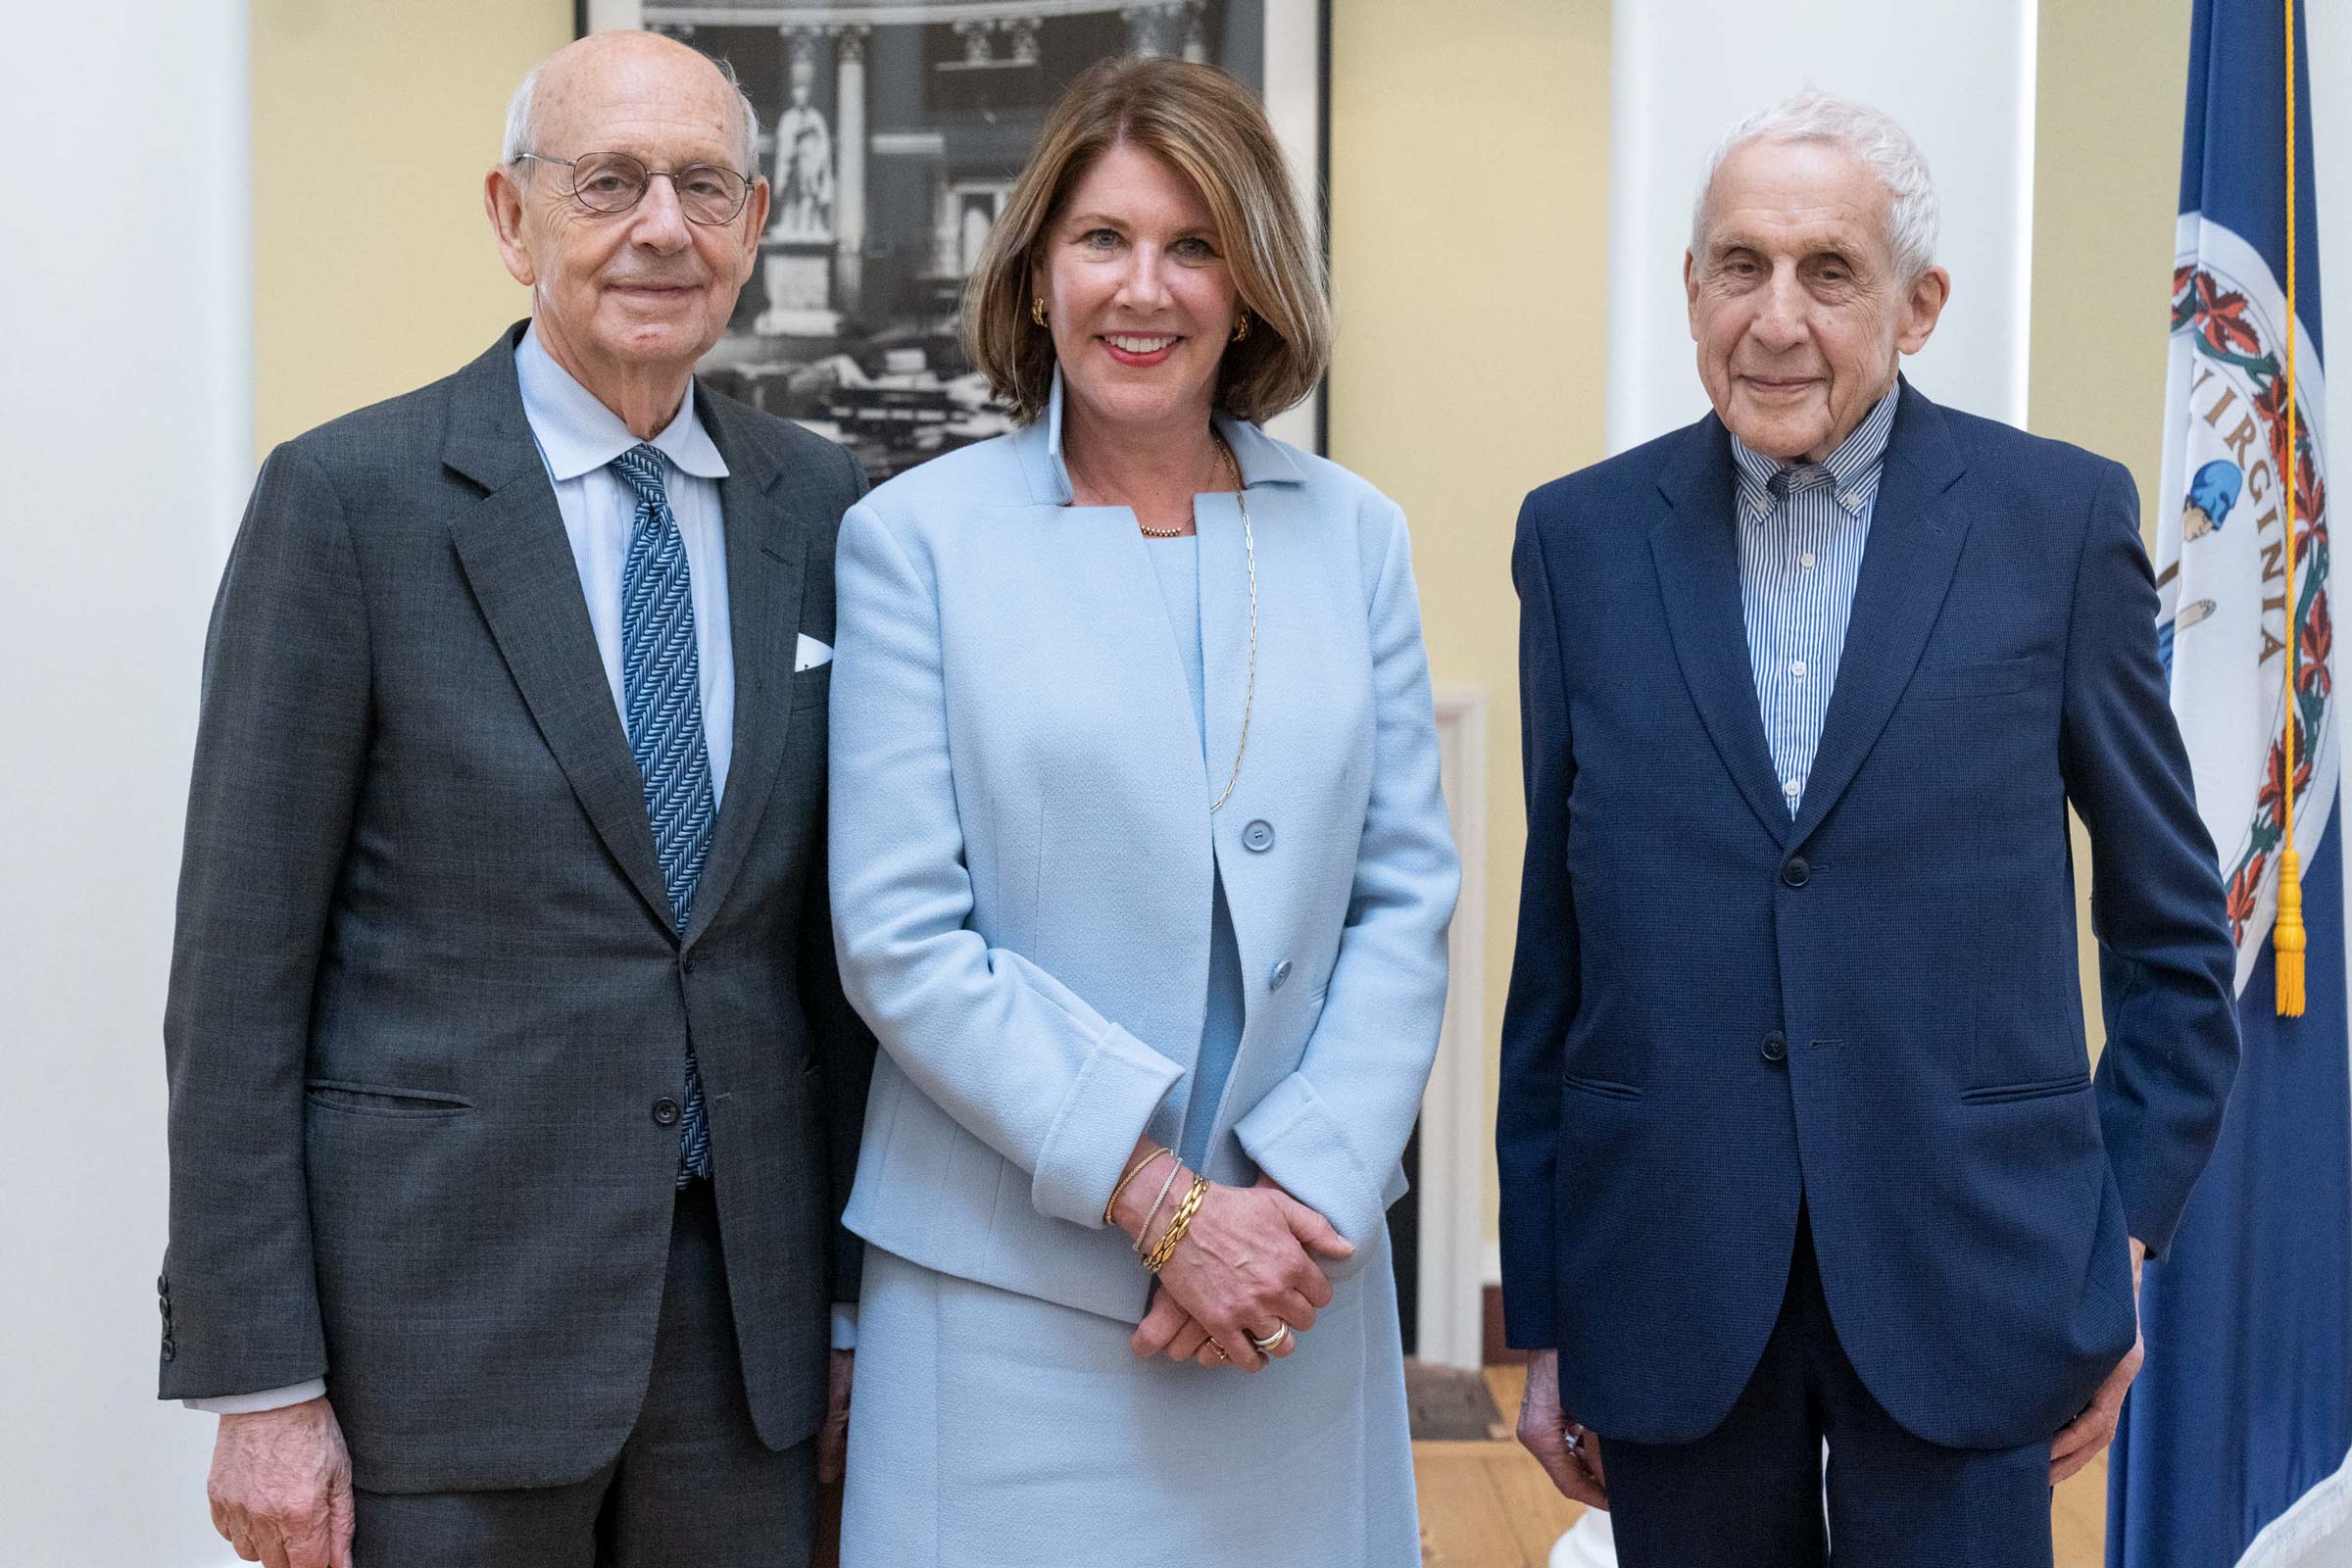 Stephen Breyer, Sherrie Rollins Westin and Kenneth Frampton pose for a group photo in the UVA Rotunda Dome Room